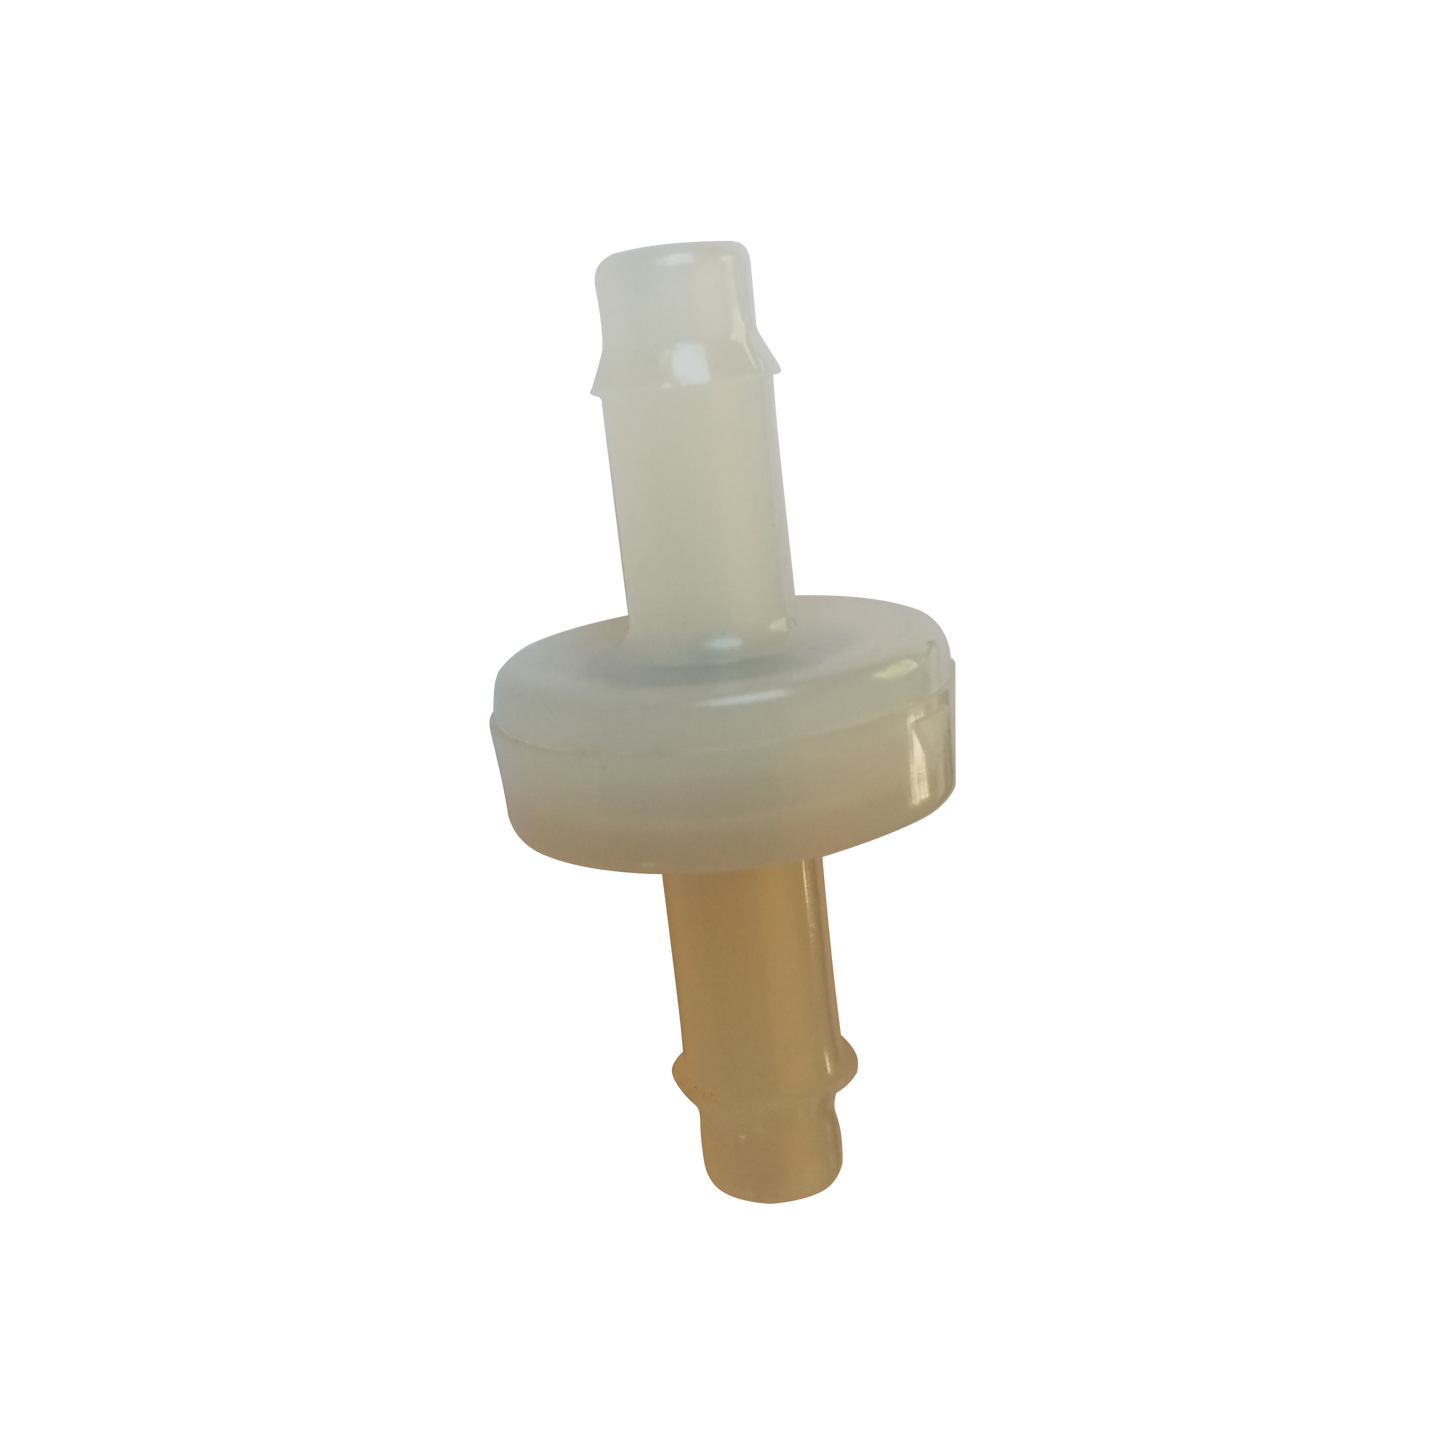 Small Check Valve for the O3 Eco Laundry Works Washers